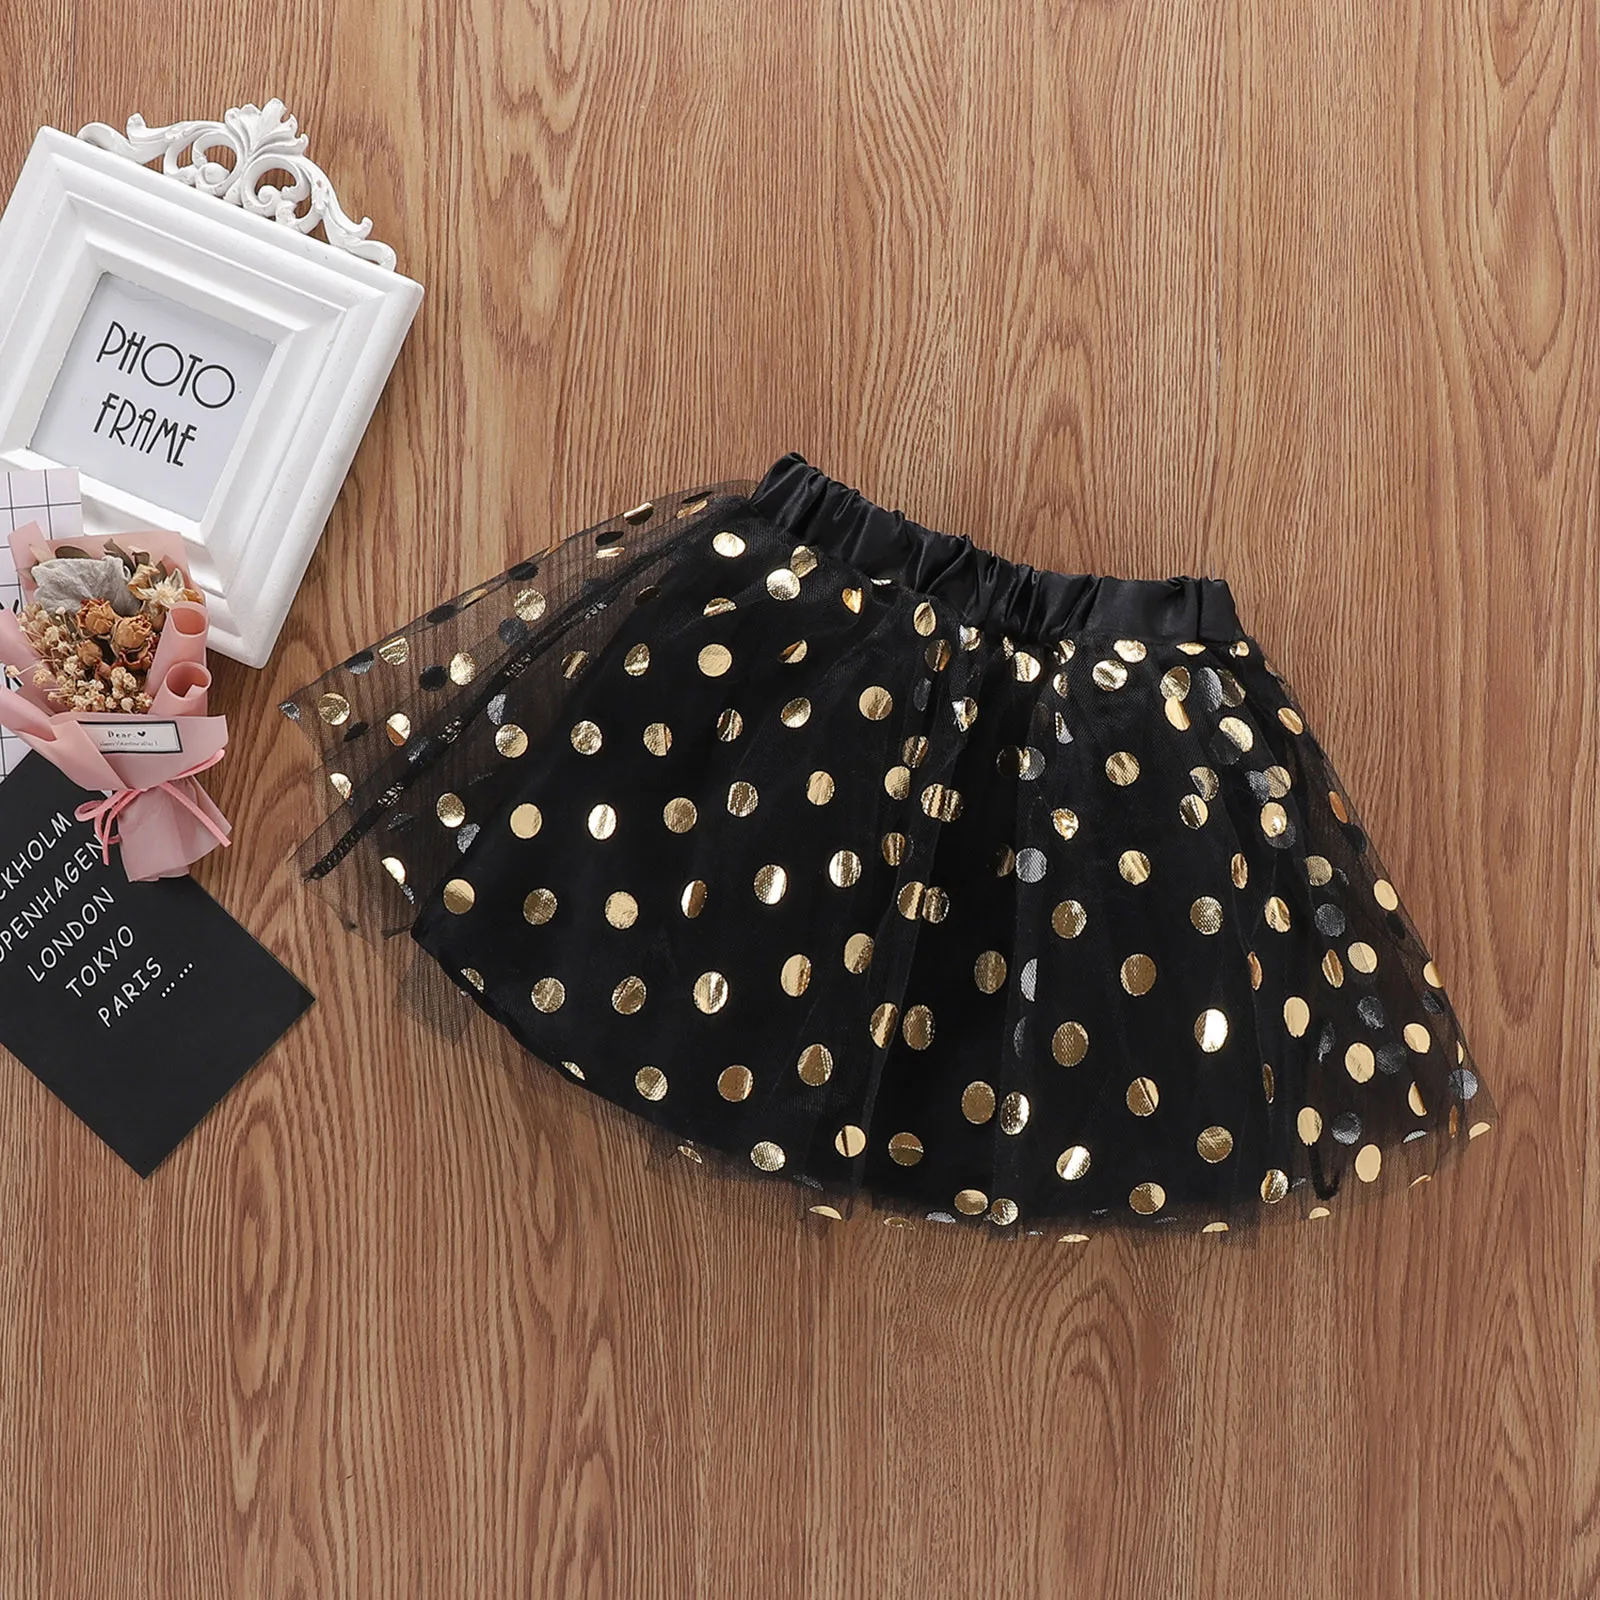 0M-24M Newborn Infant Baby Girls Letter Print Romper Black Tutu Skirt Headbands New Years Outfits Romper Baby Clothes Set images - 6